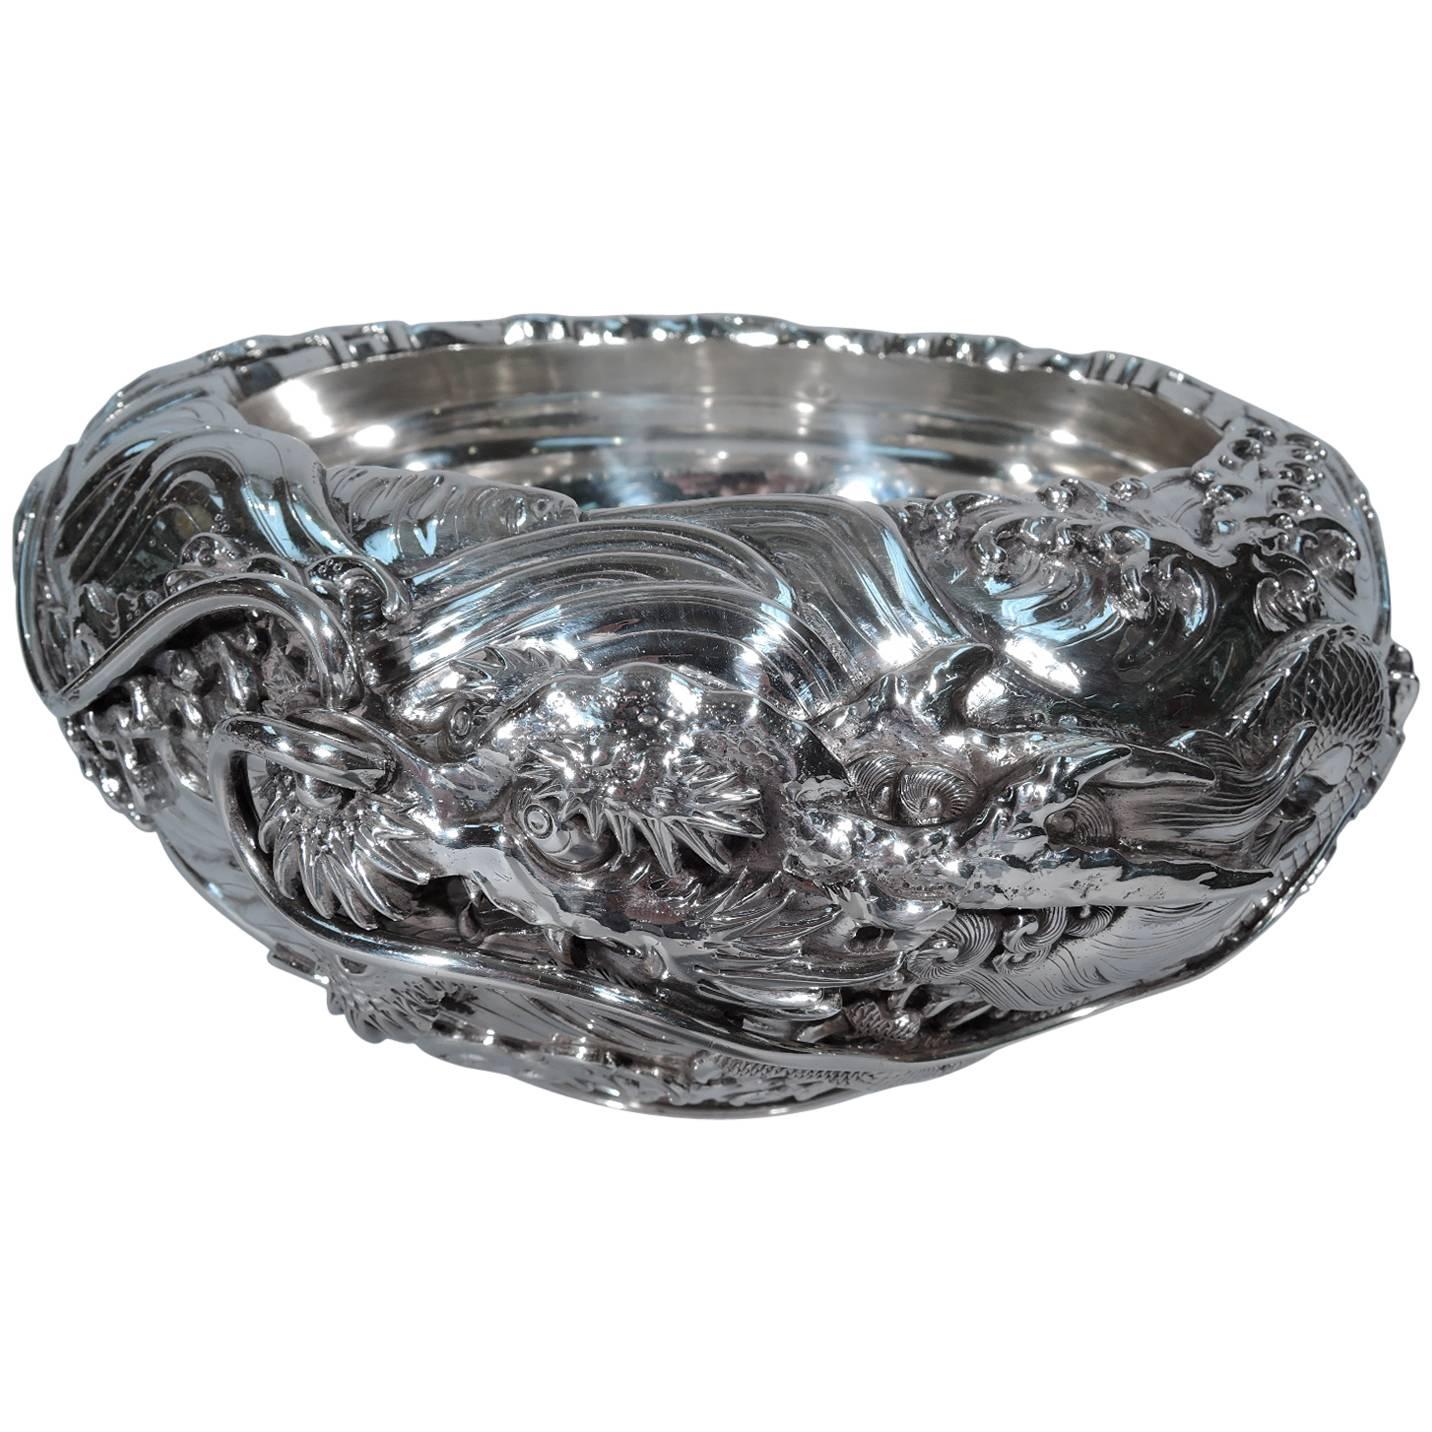 Fantastic Japanese Silver Centerpiece Bowl with Dragon